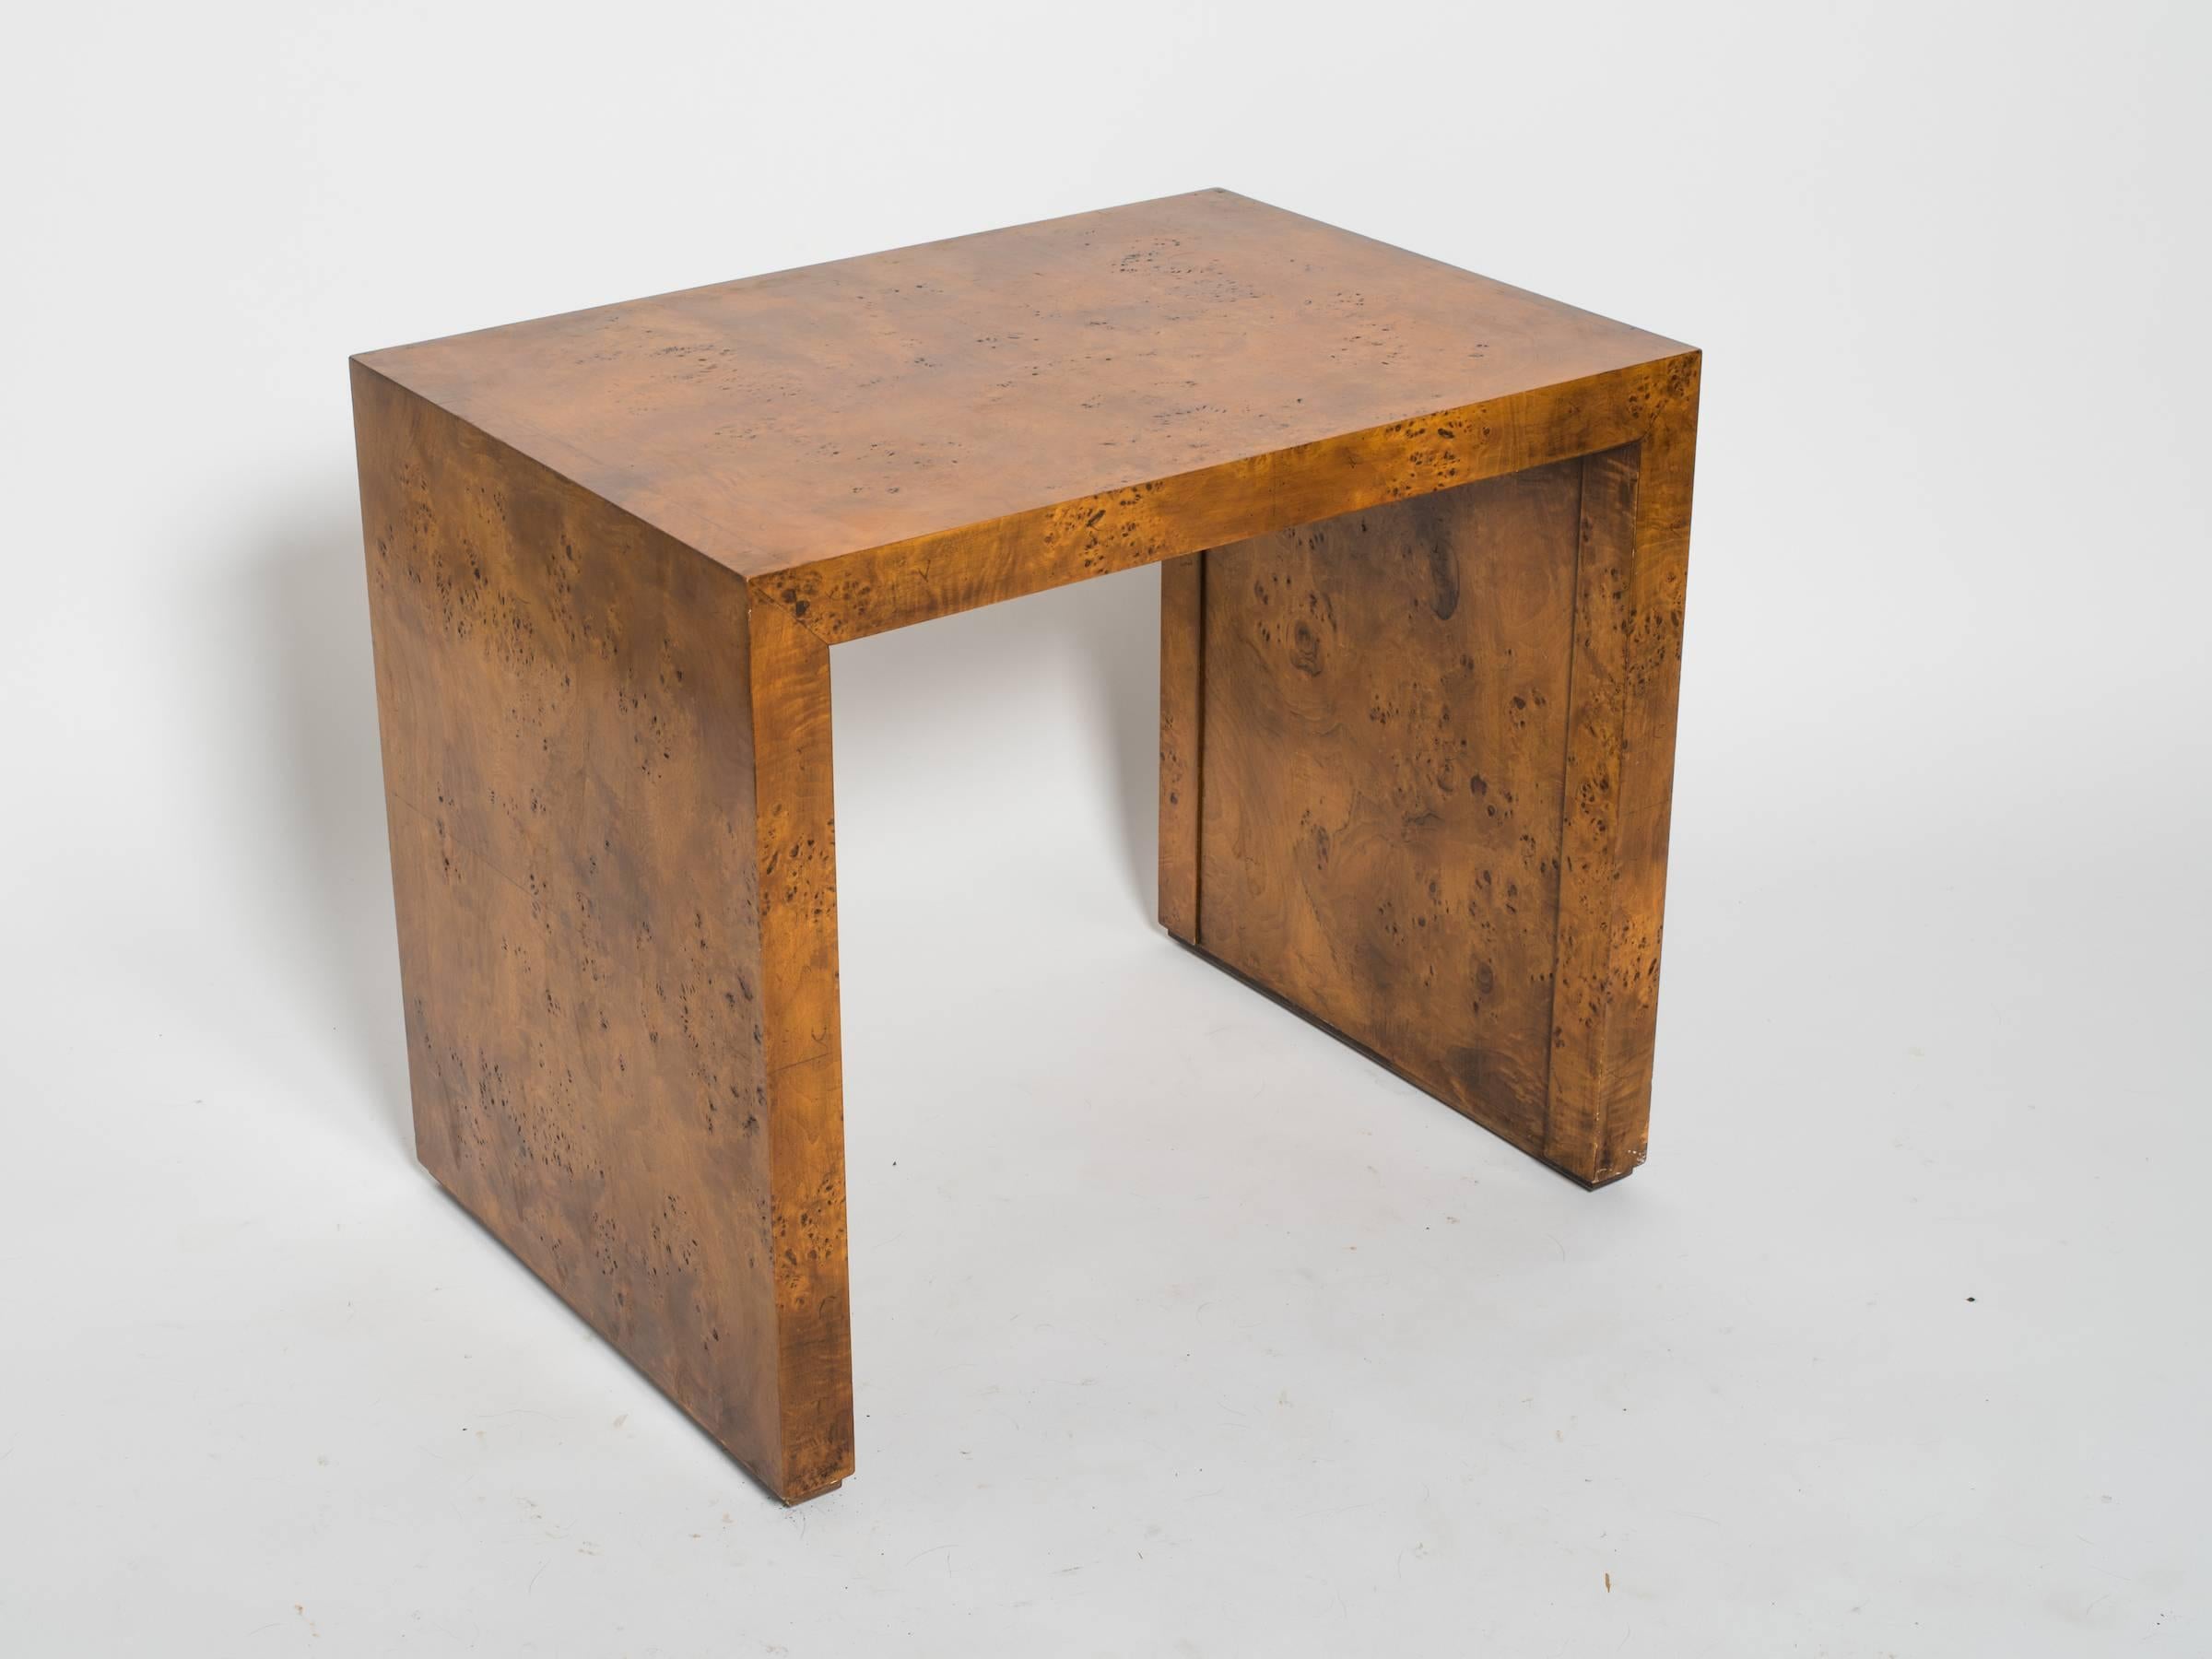 1970s burled wood side table.